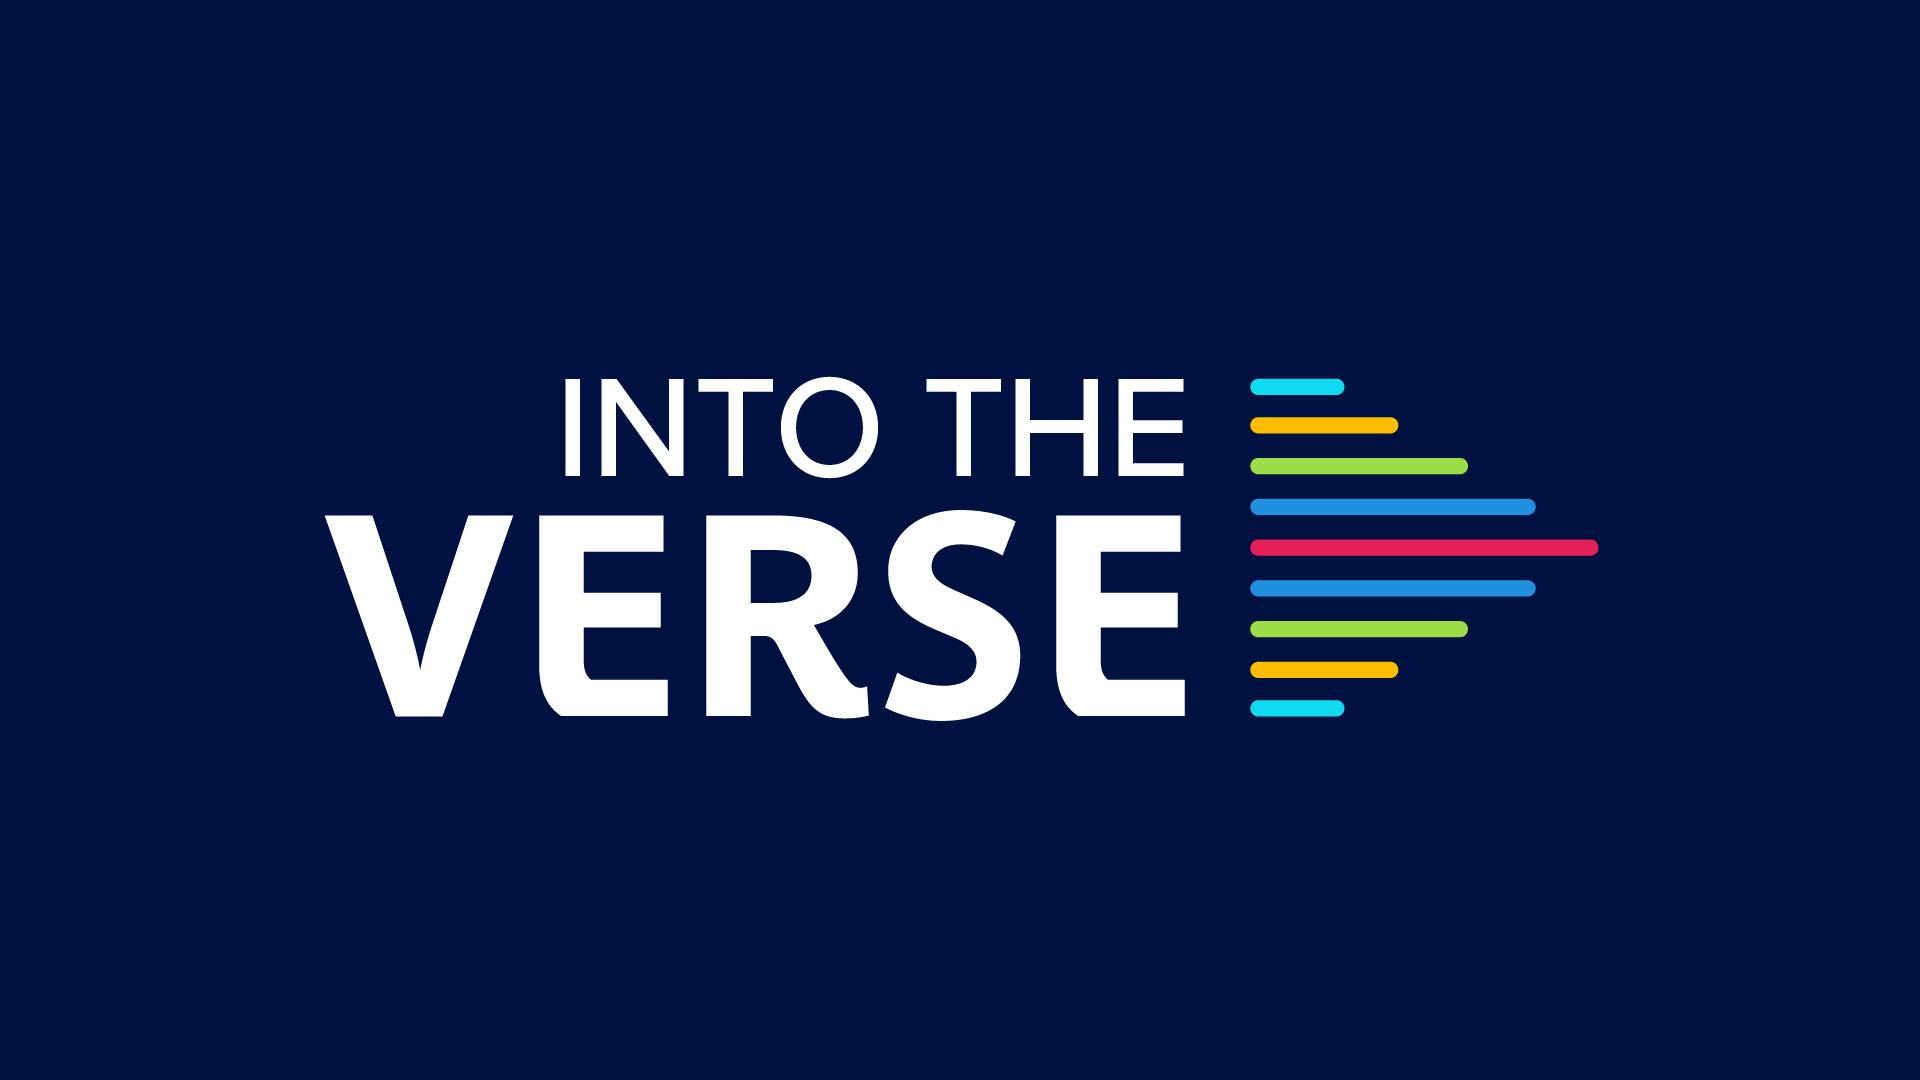 into-the-verse